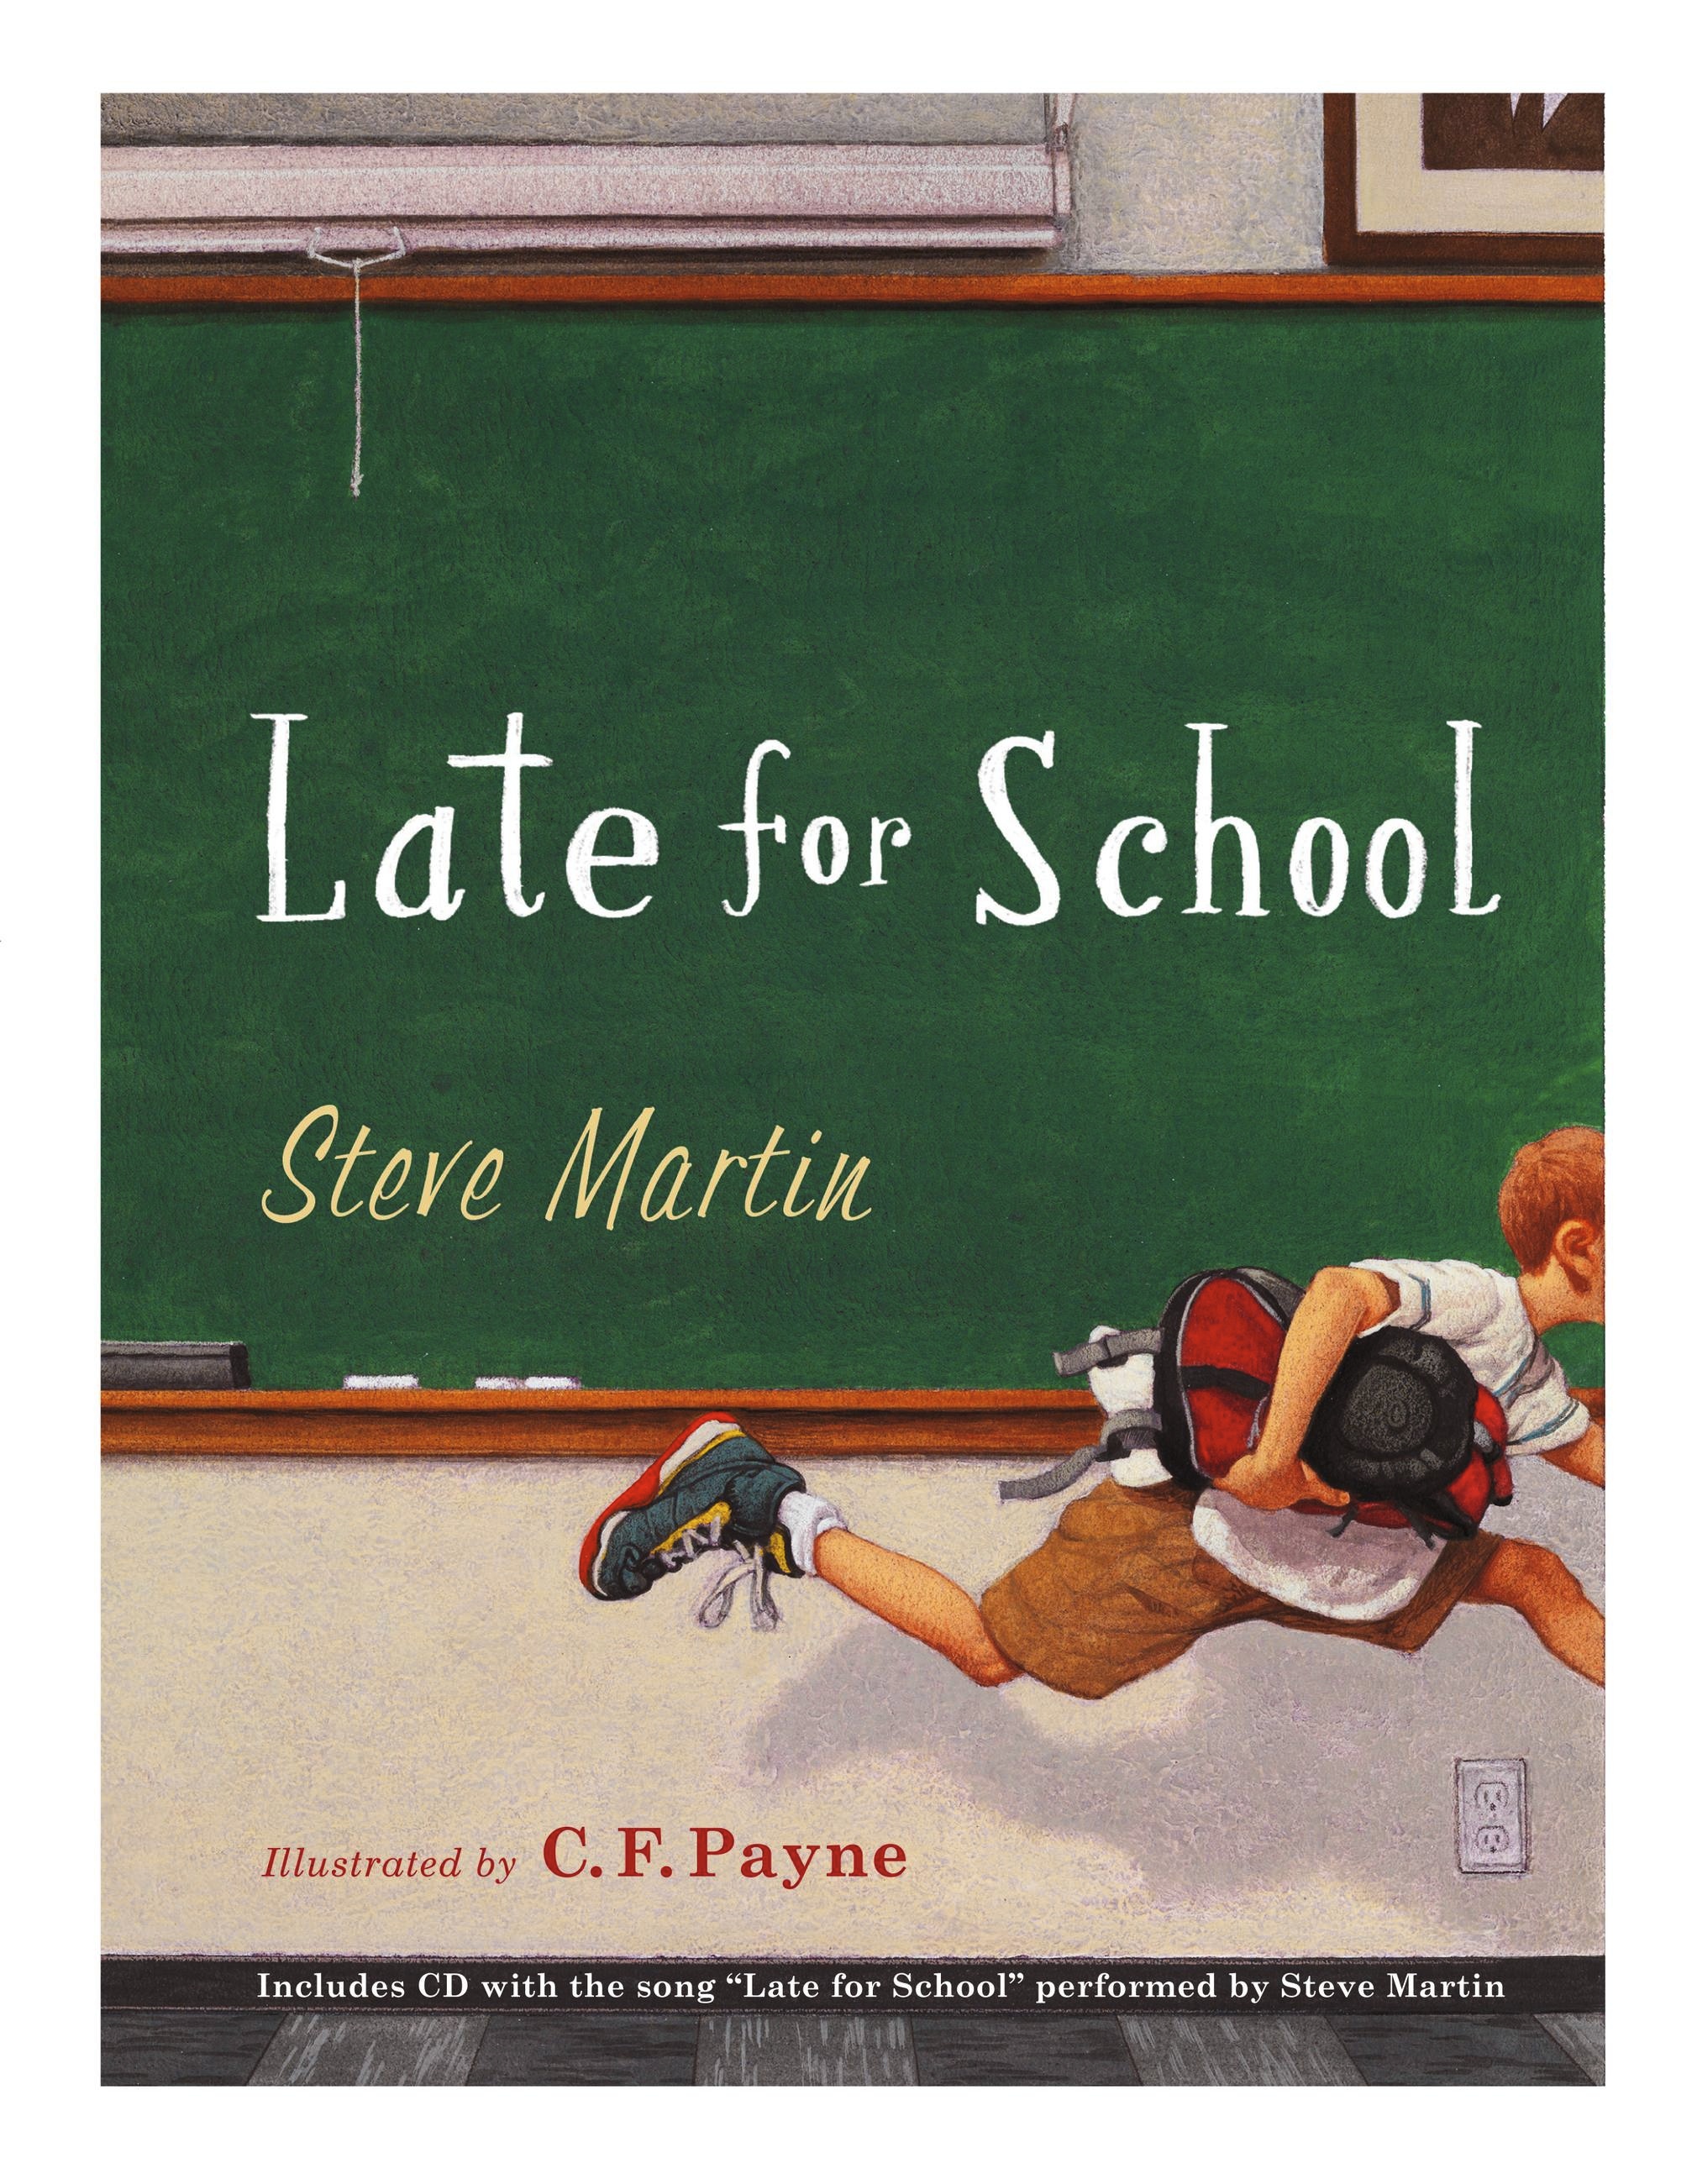 Late for school. Late book.